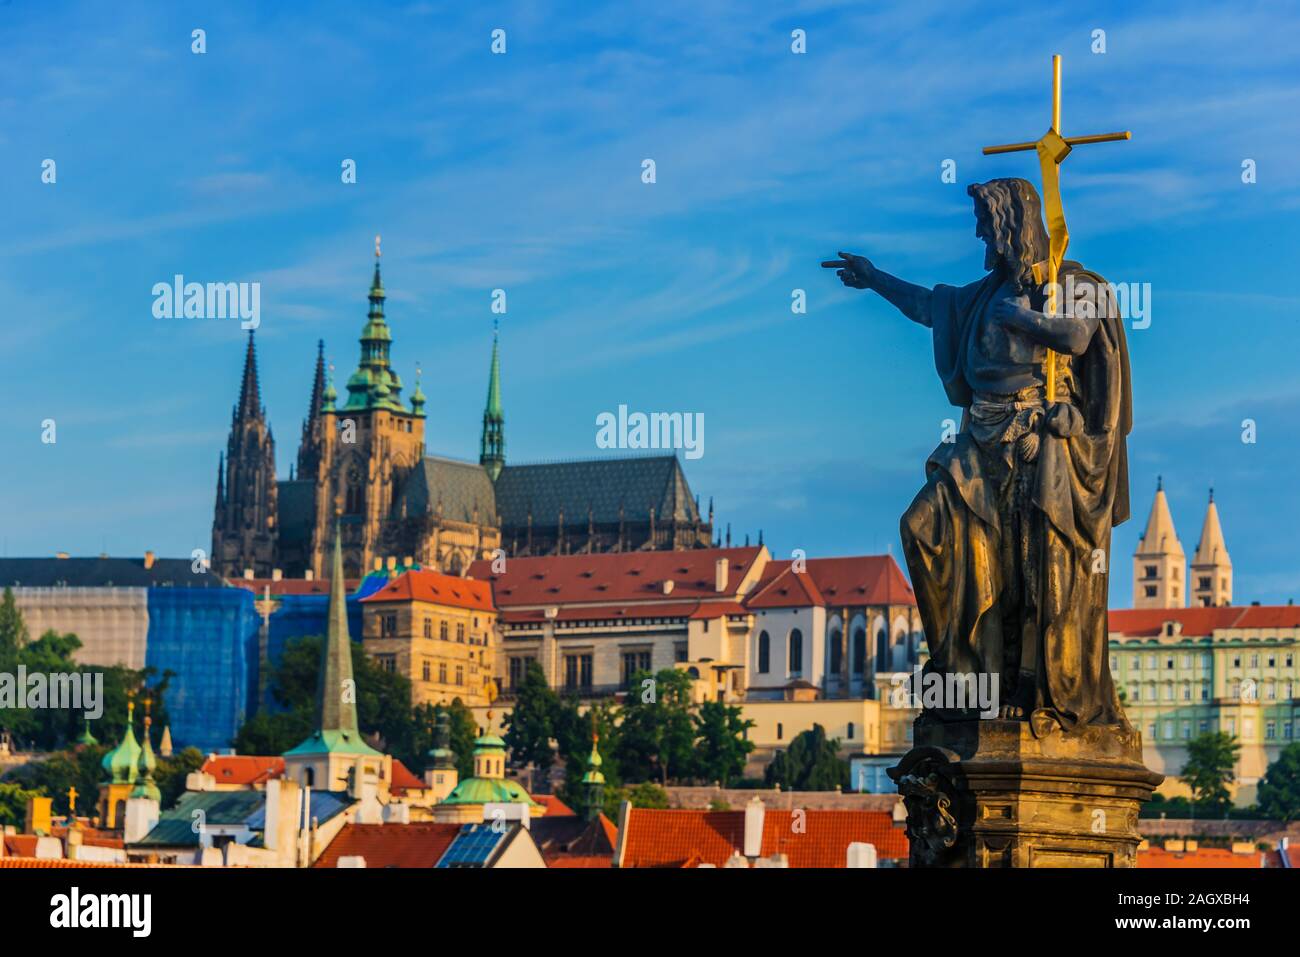 View of Hradcany district in Prague with St. Vitus Cathedral and Prague Castle. Czech Republic Stock Photo